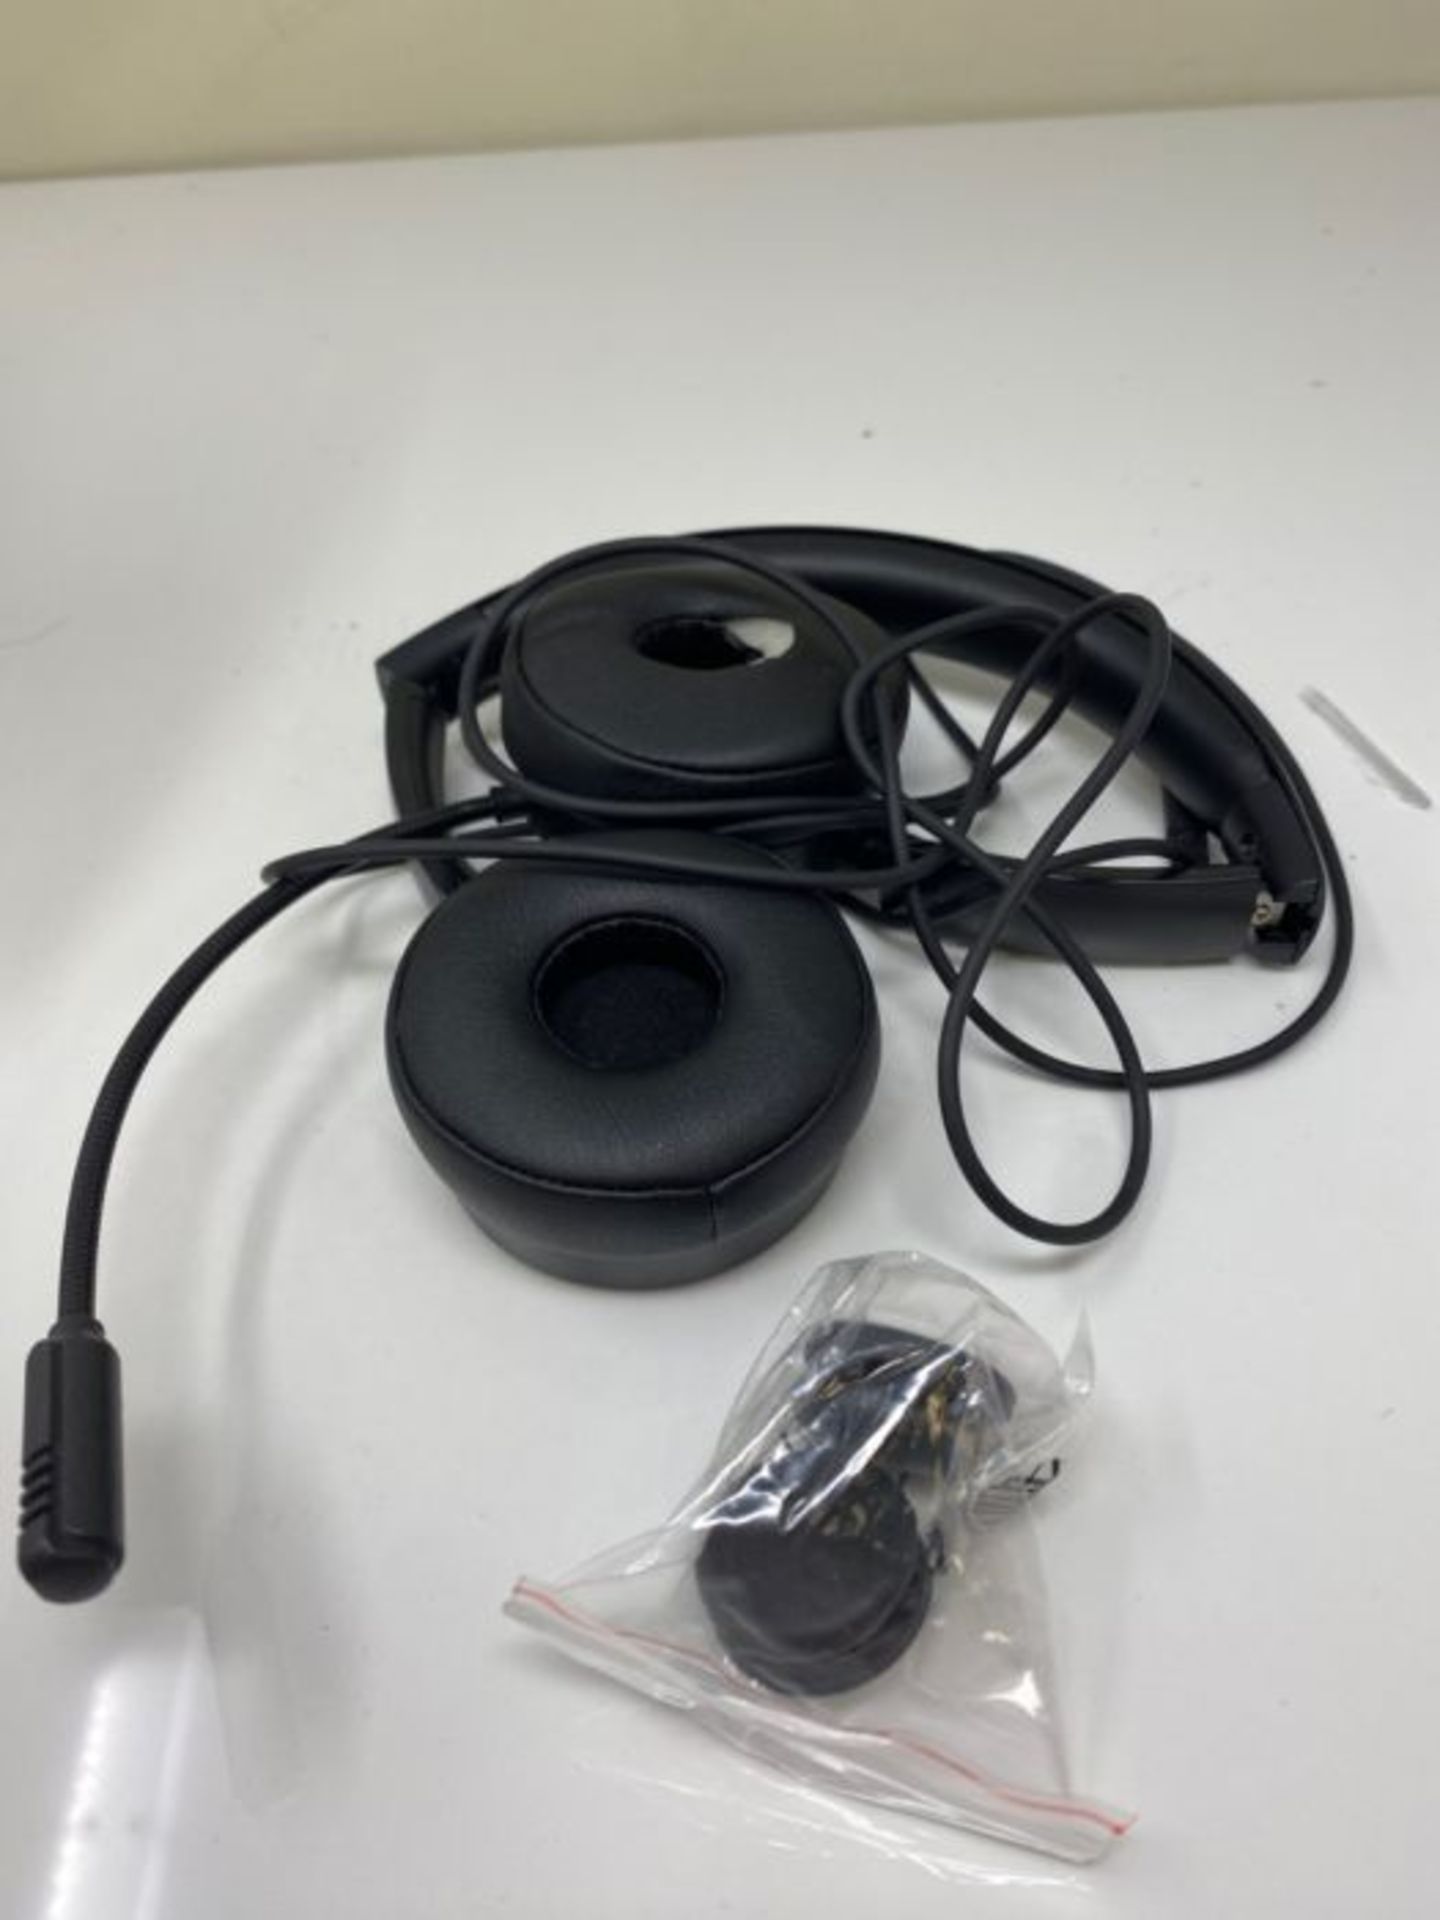 New Bee USB Headsets with Microphone with 3.5mm Jack Noise Cancelling Mic Comfortable - Image 3 of 3